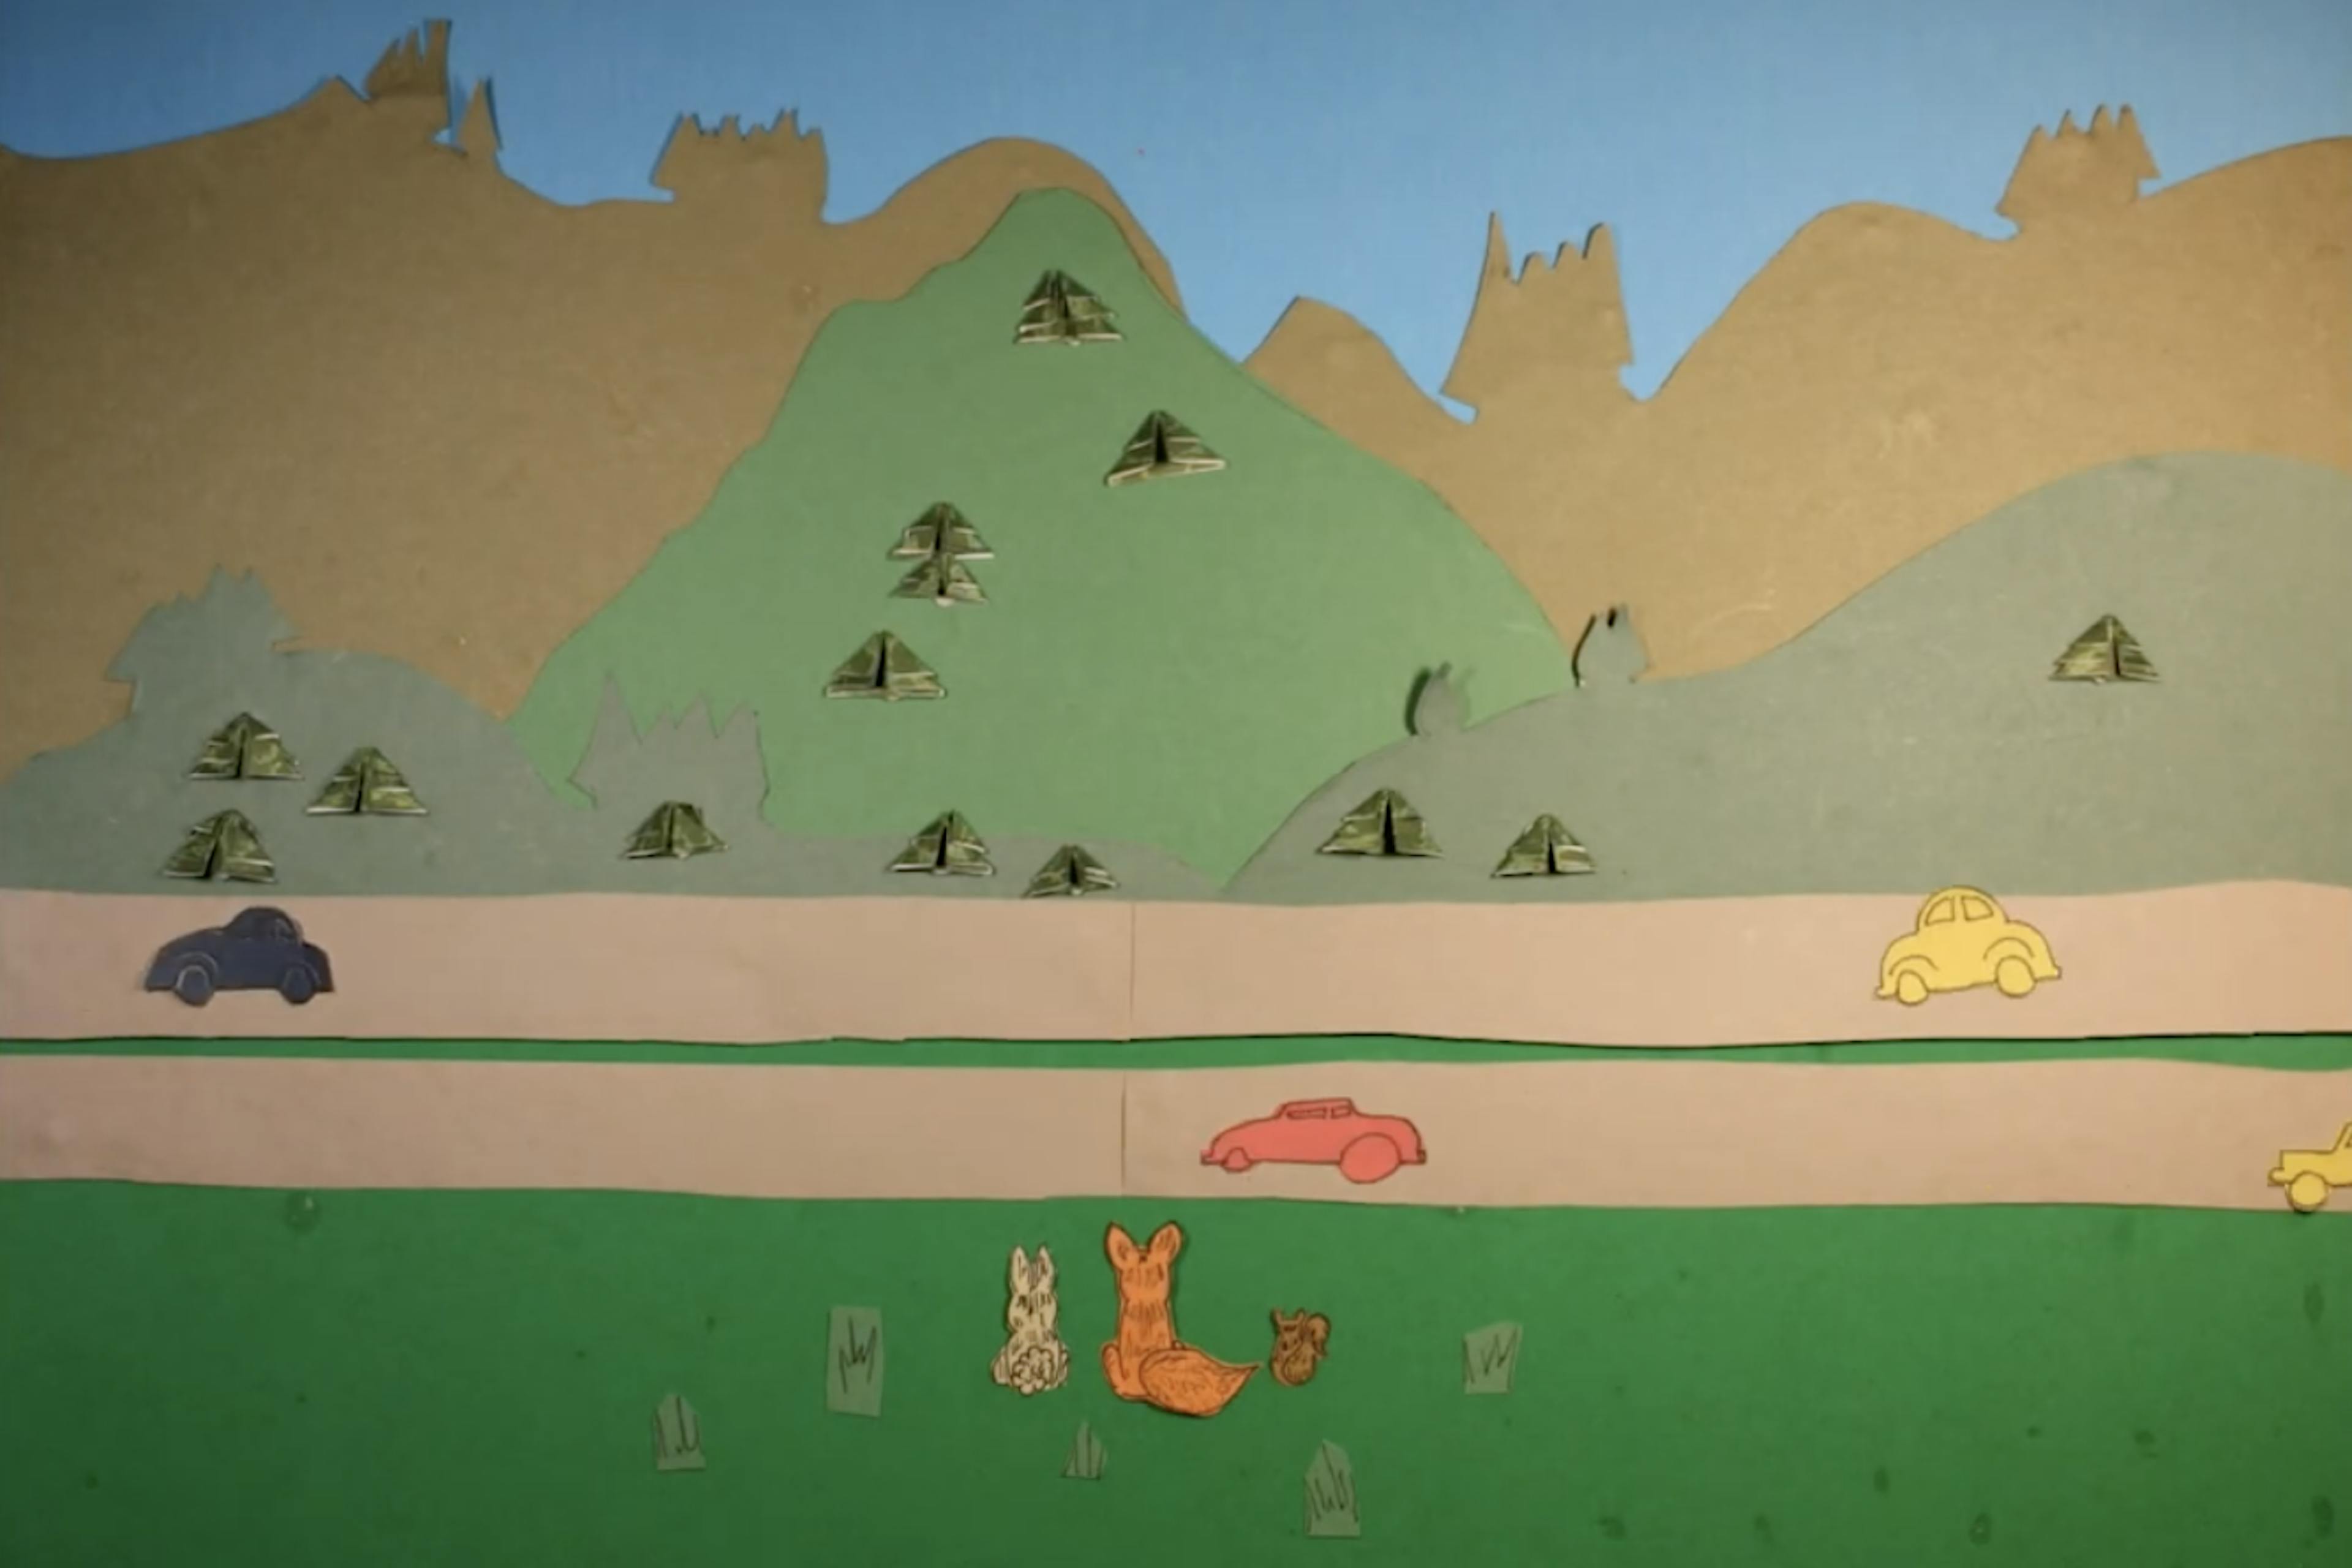 A rabbit, a fox and a squirrel look at a busy highway standing between them and the rolling hills beyond-all made from cut-out construction paper.